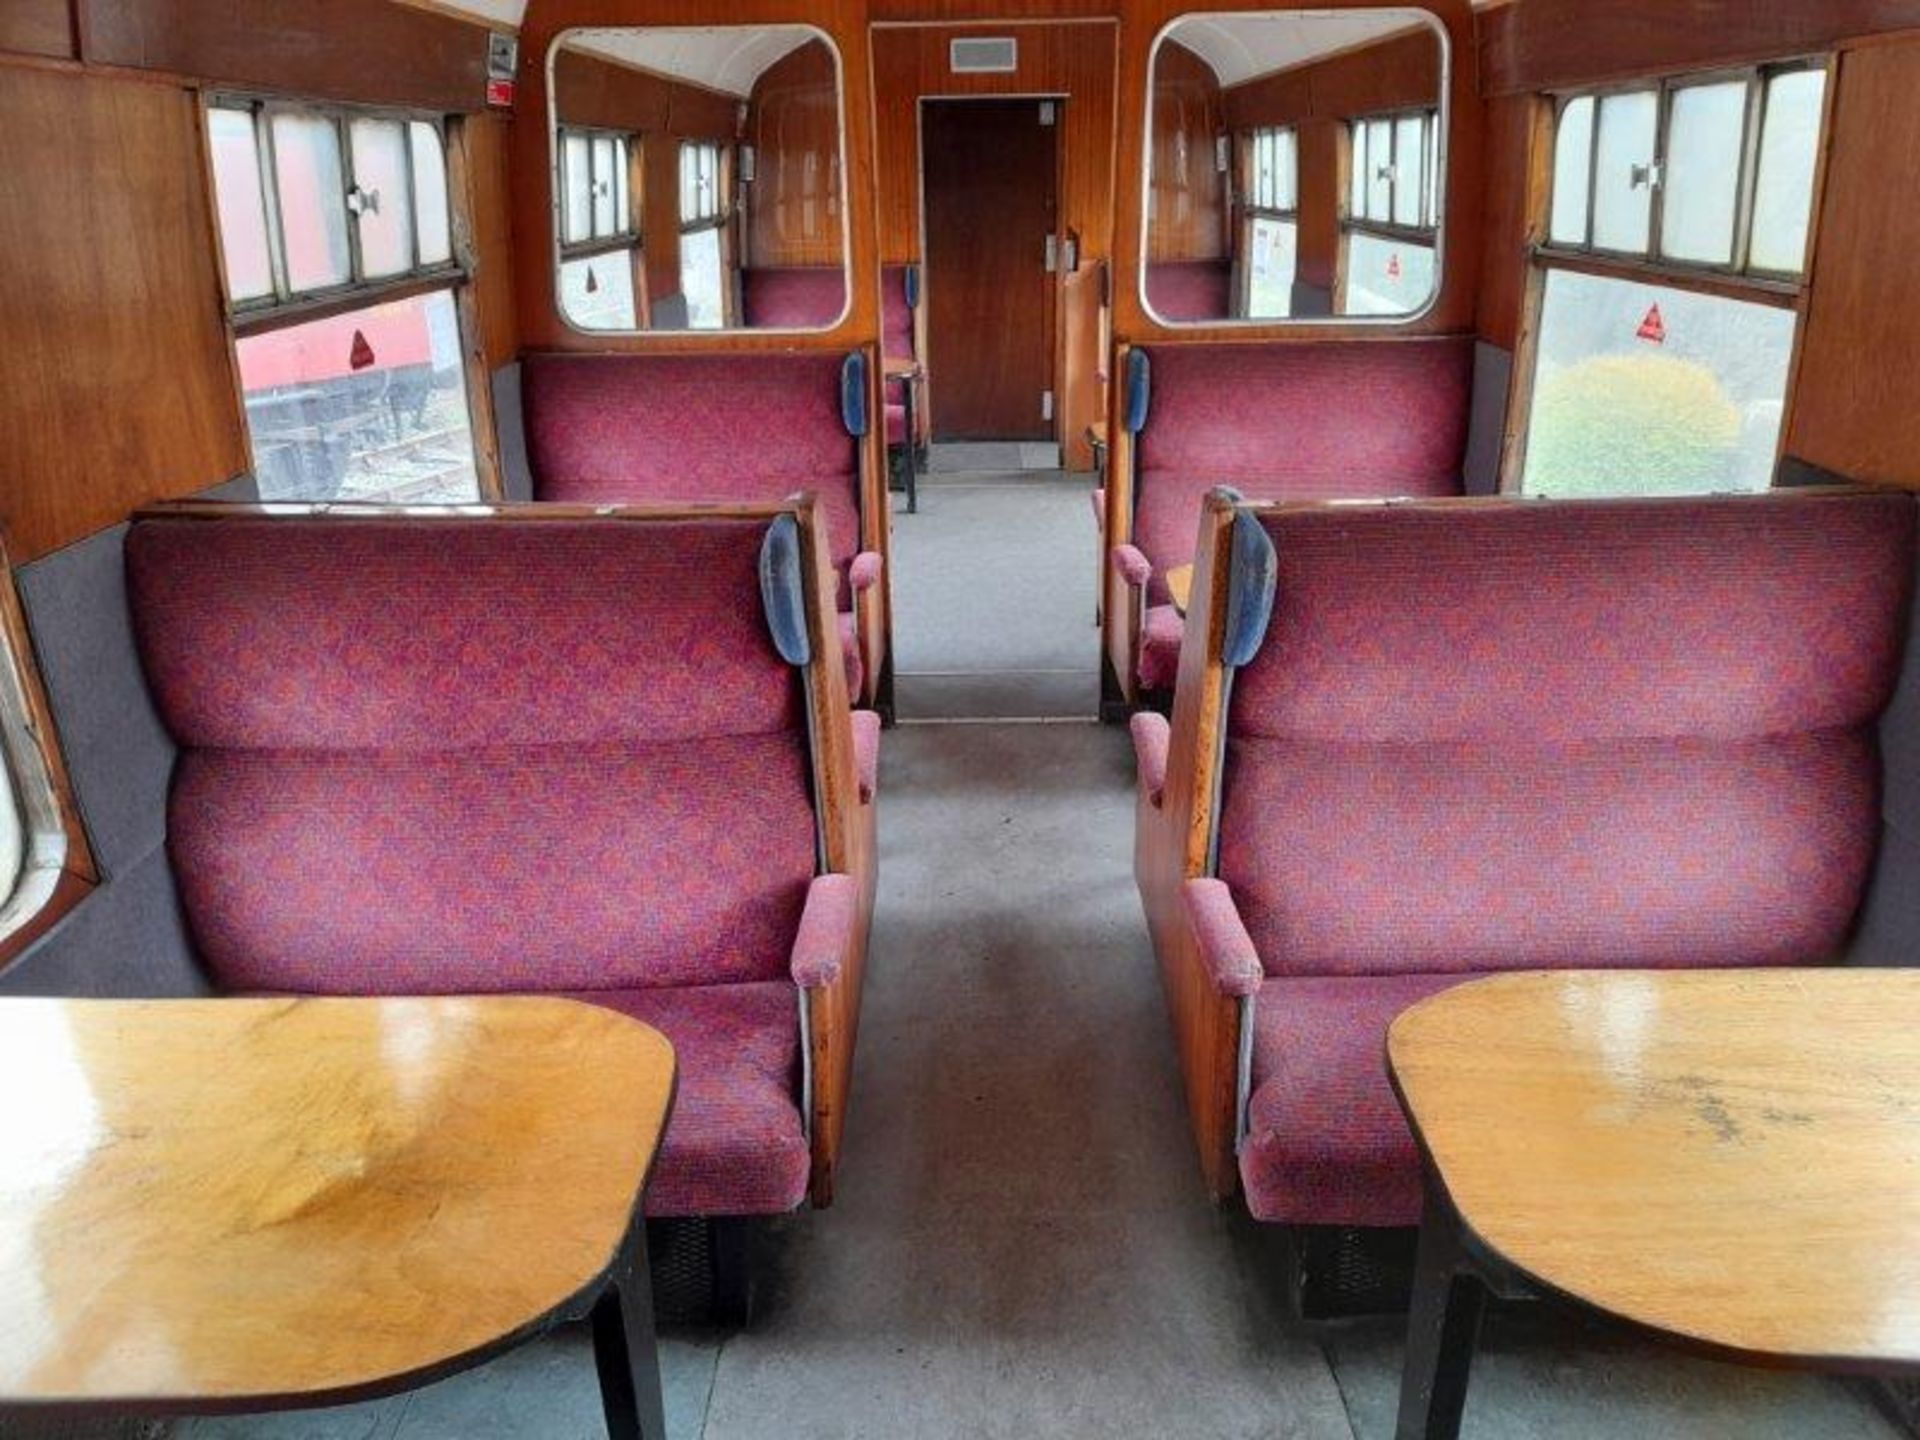 BR Mark 1 type TSO coach, no. M4858, 55-seats and 2 bench seats in red/ purple moquette, carmine and - Image 10 of 14